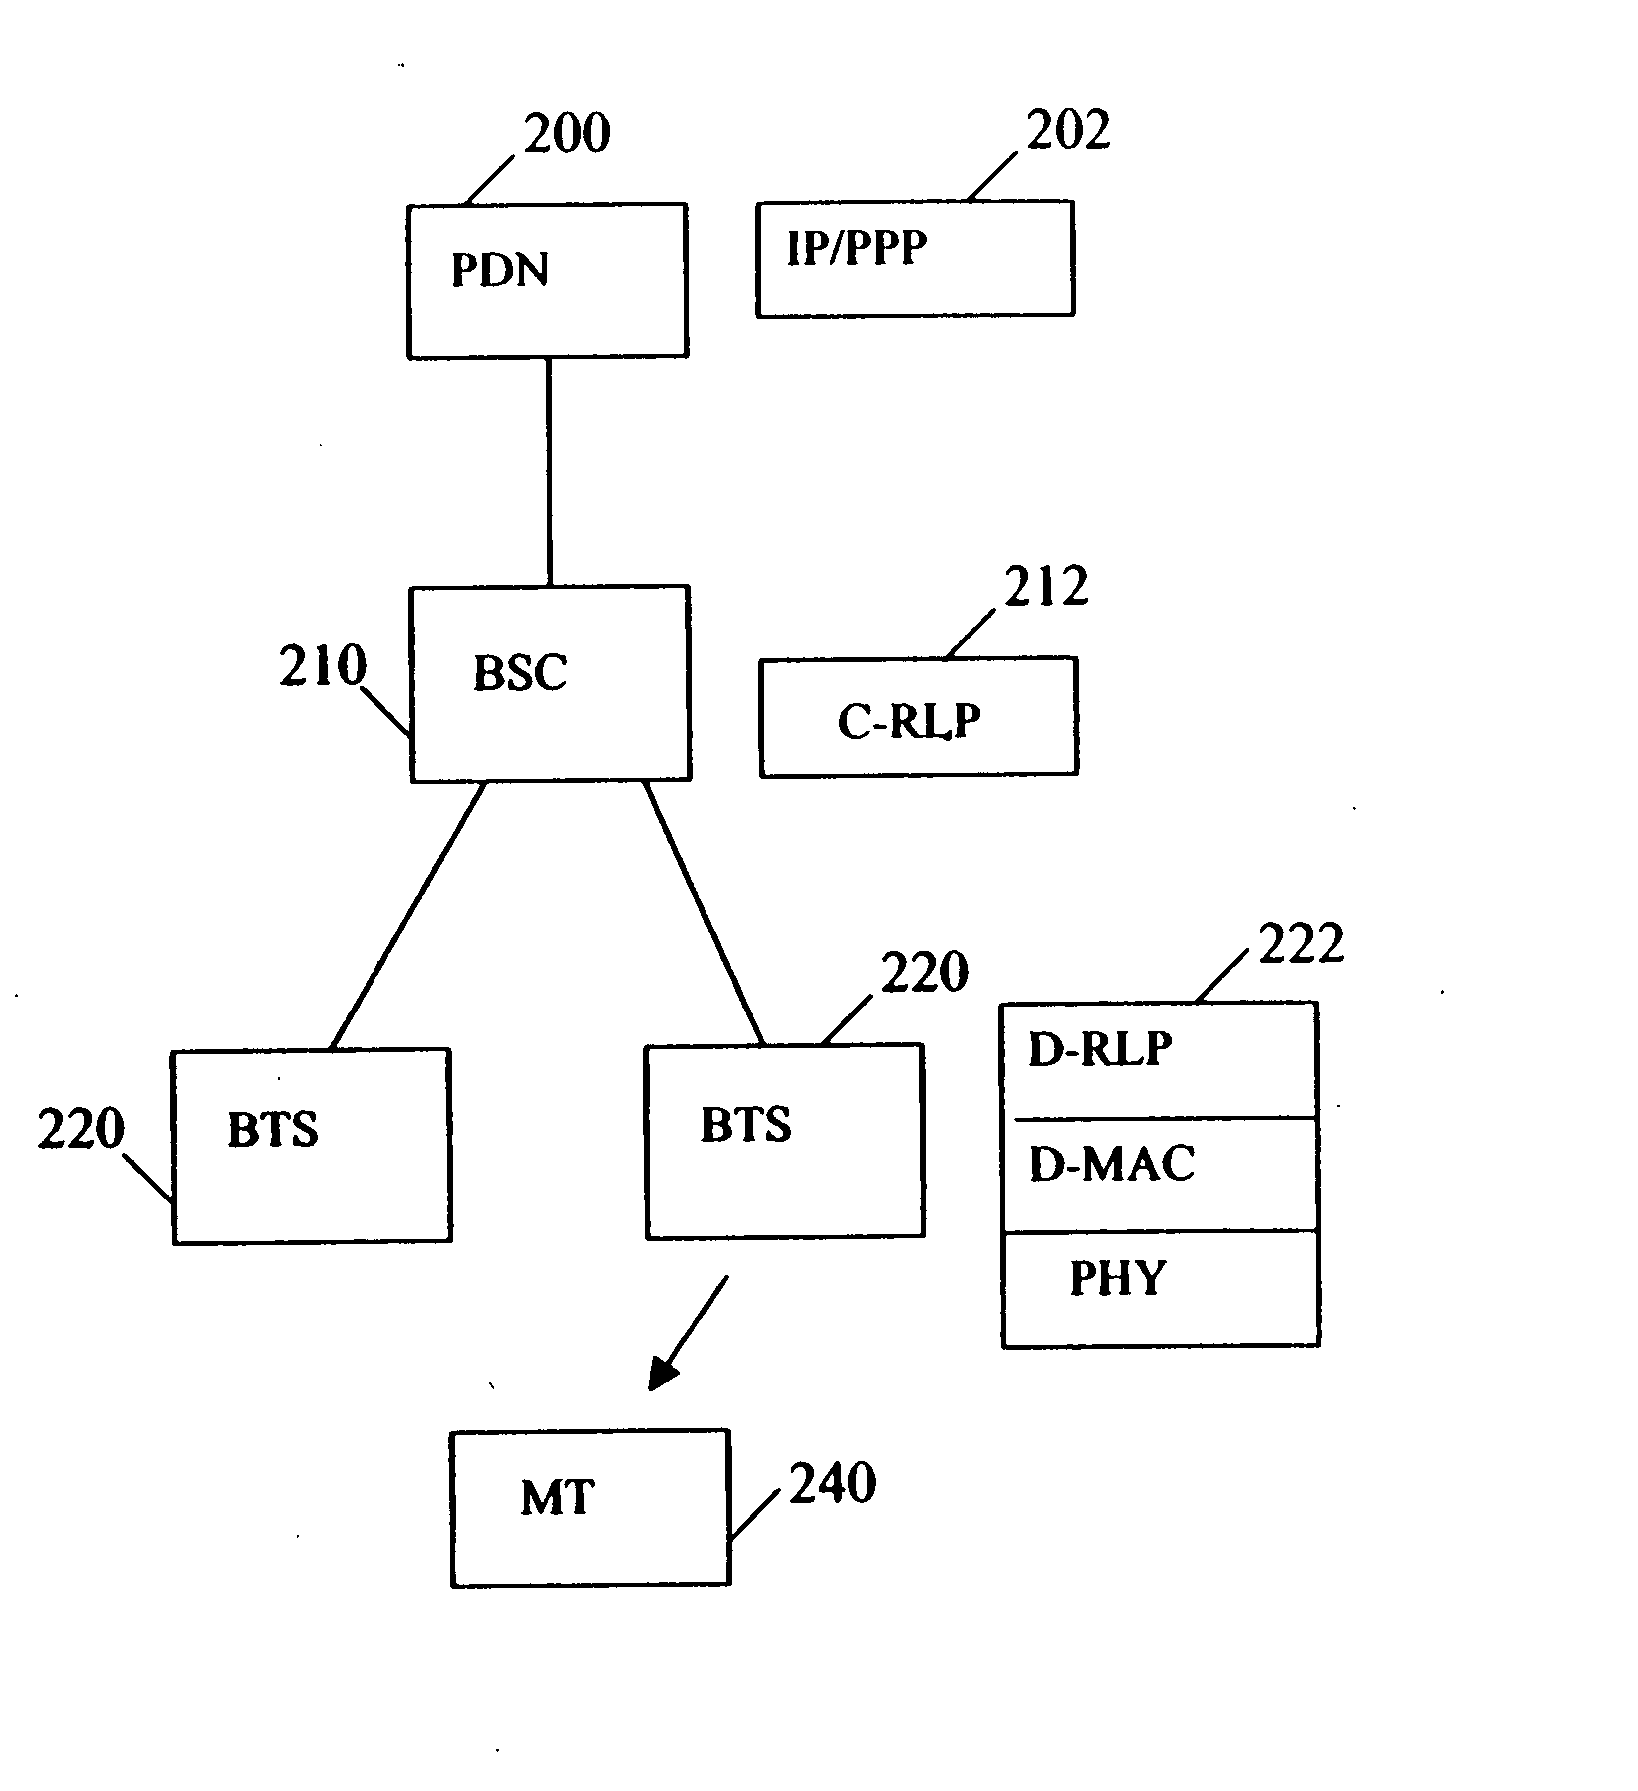 Dynamic, dual-mode wireless network architecture with a split layer 2 protocol